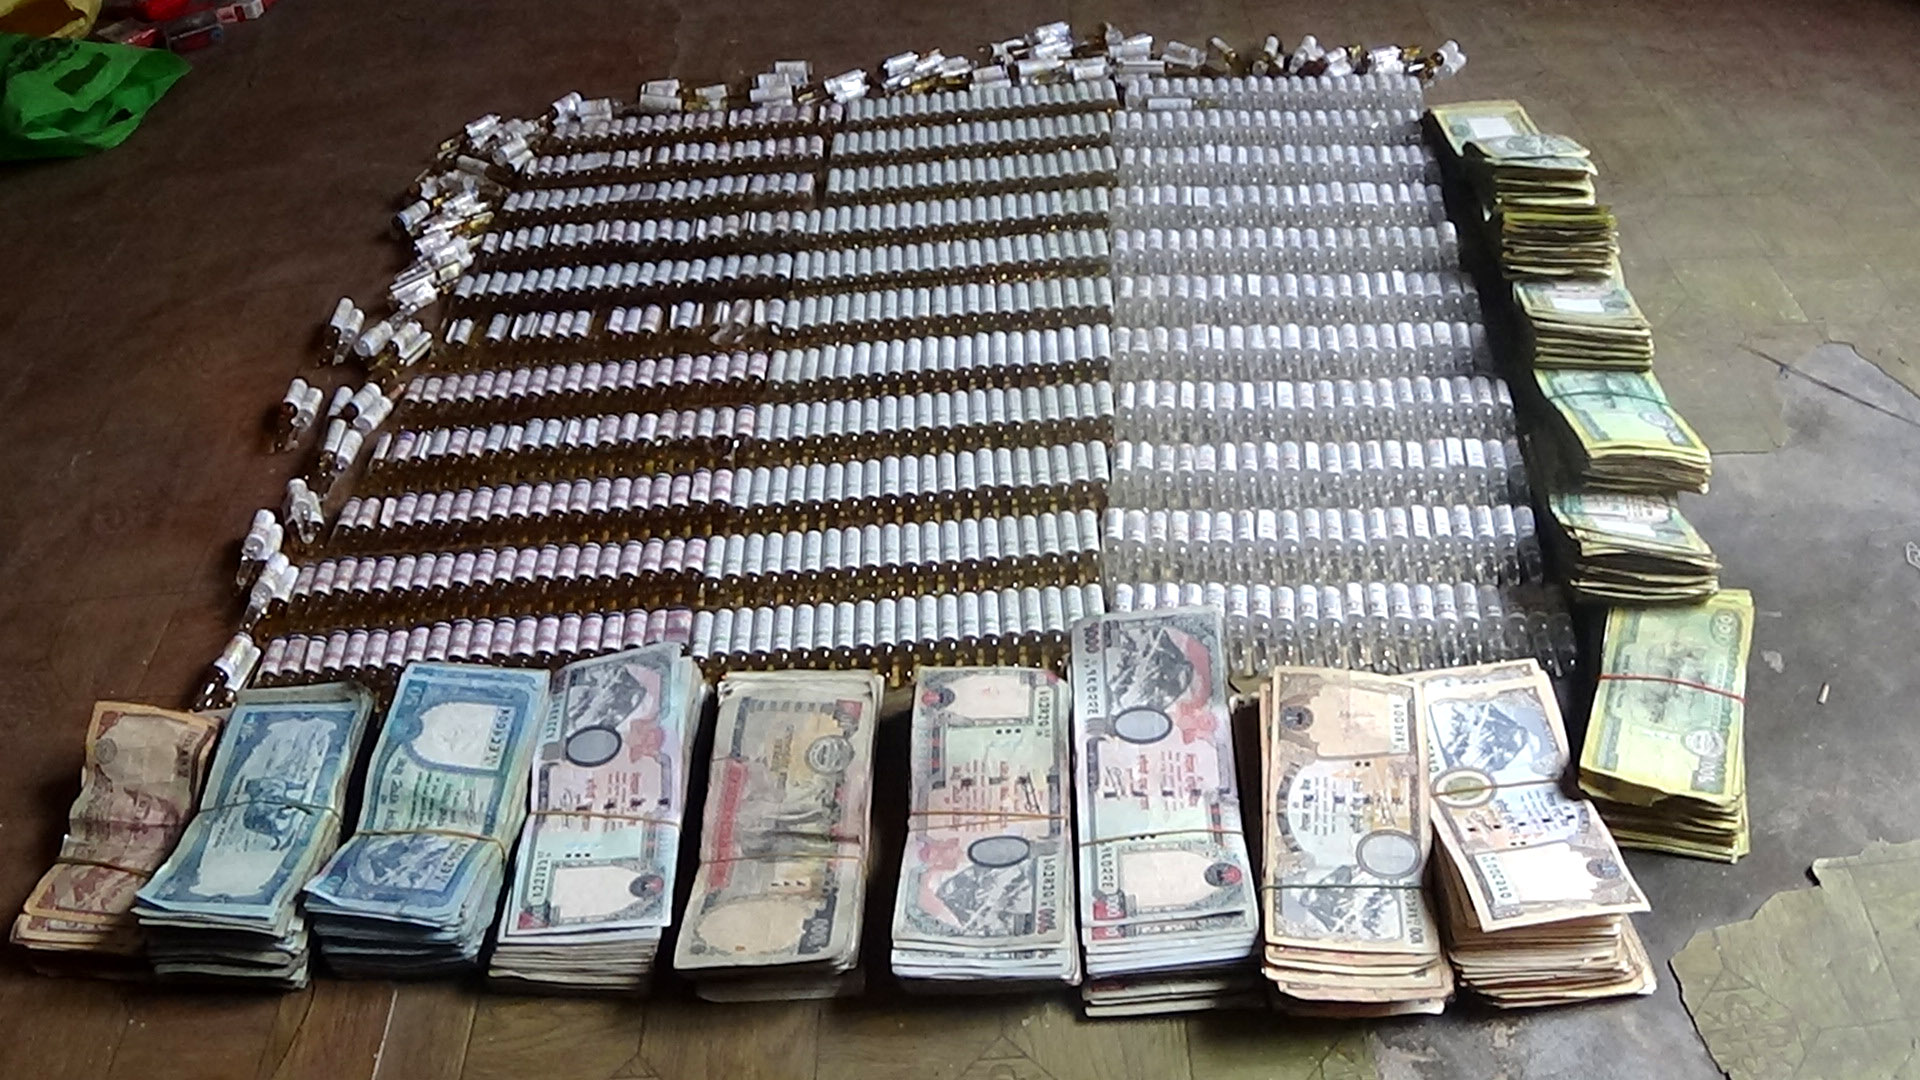 Chitwan police make public illegal drugs and drug money recovered from the arrestees' possession on Sunday, November 25, 2018. Photo: DPO, Chitwan